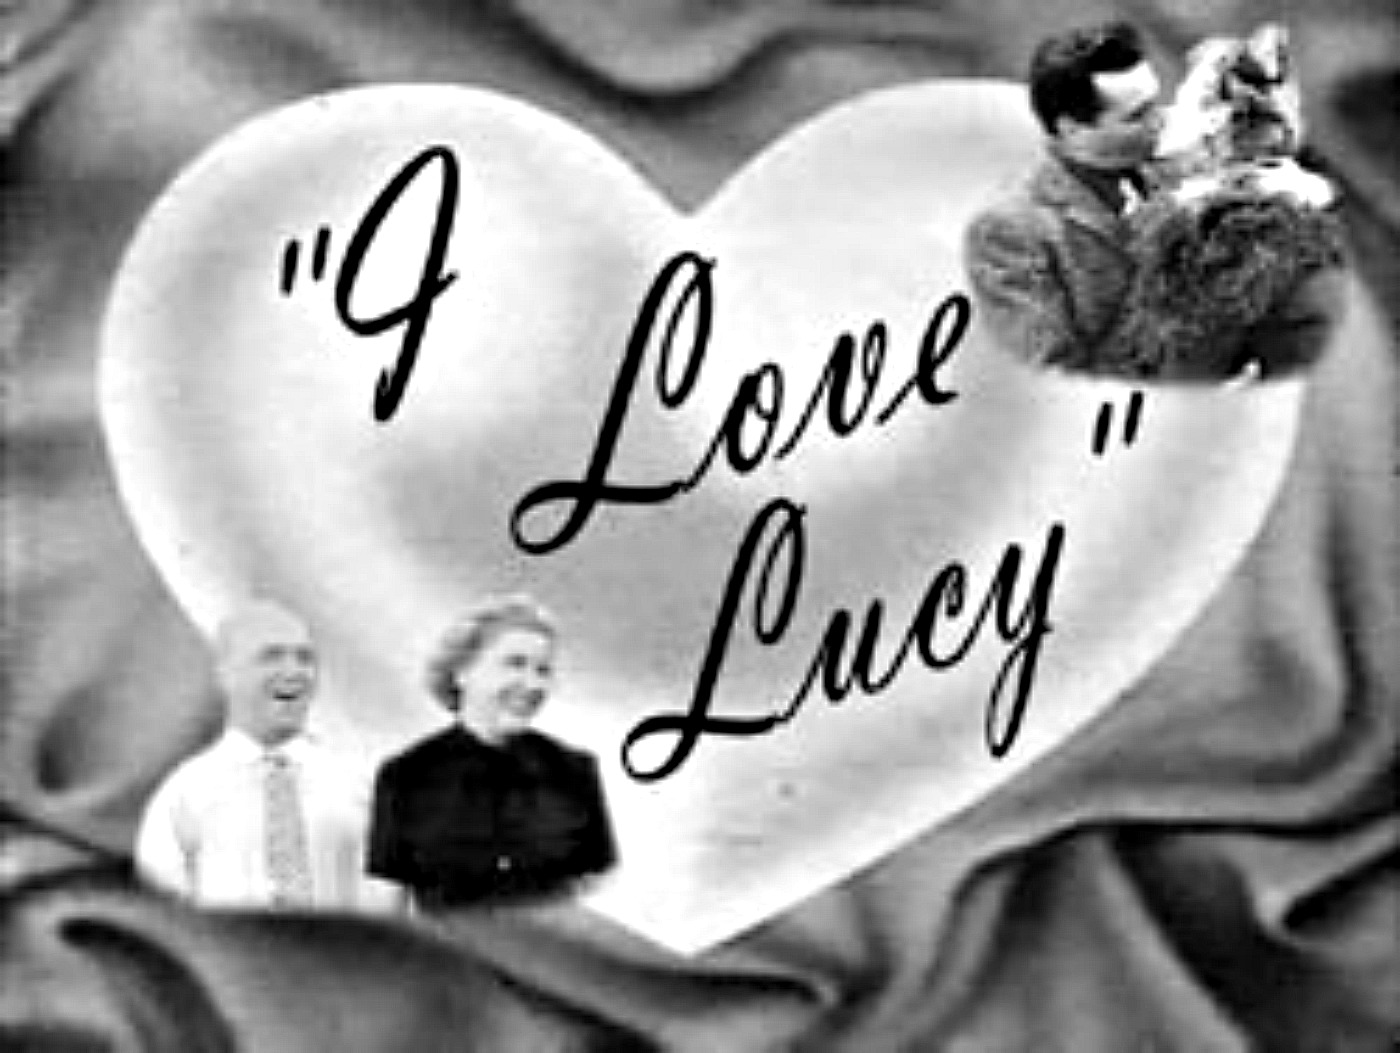 Love Lucy Wallpaper East 68th Street Photo